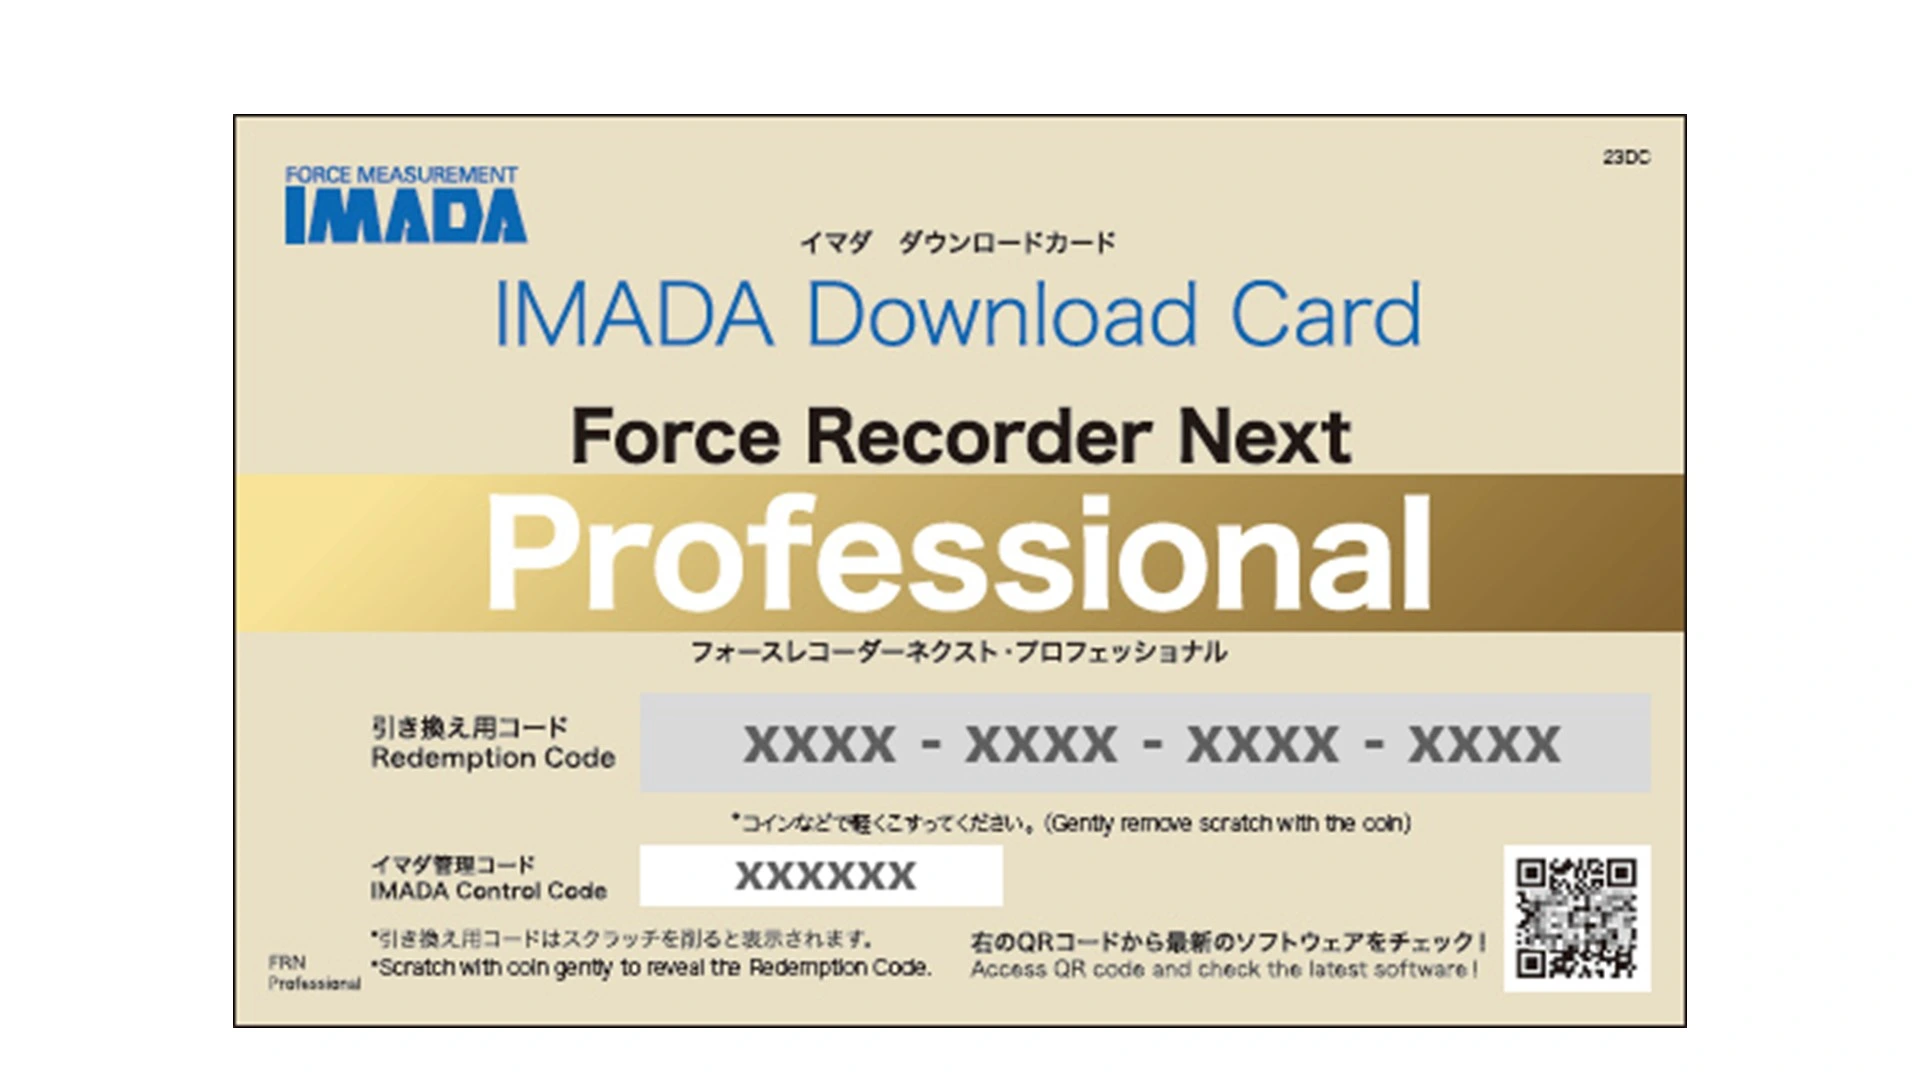 Download Card Force Recorder Next Professional Image